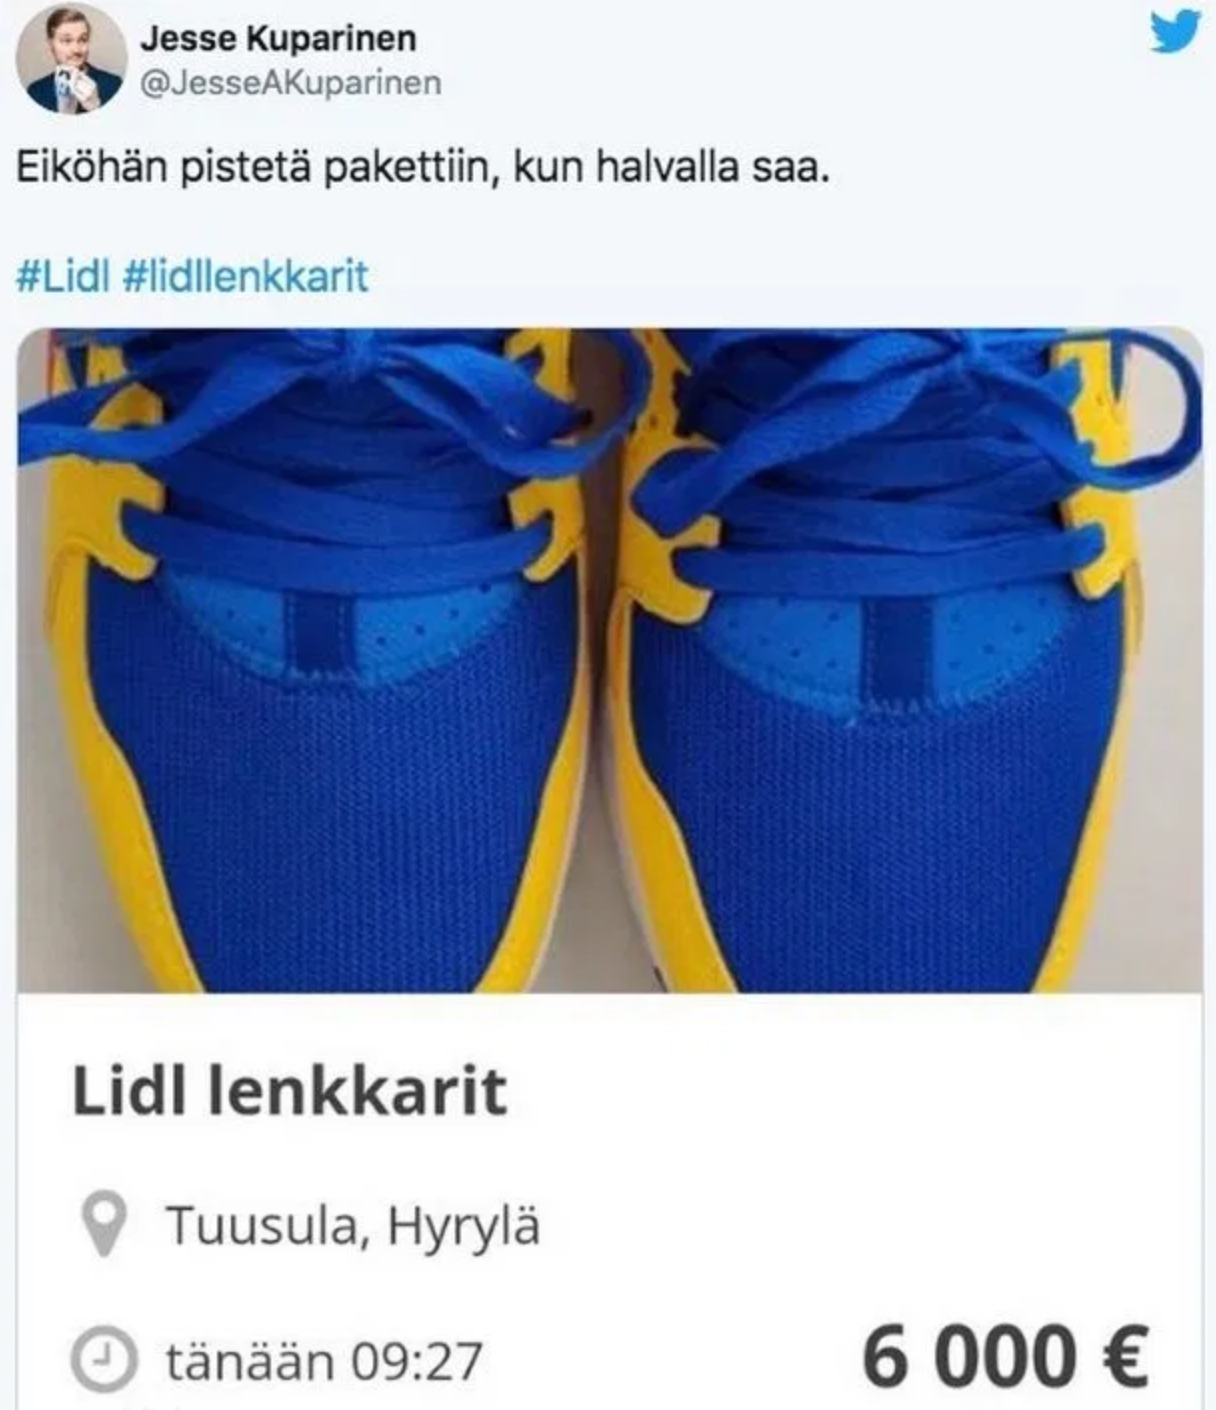 LIDL's Limited Edition Sneakers Sell for $6,700 on eBay | by Geraint Clarke  | Better Marketing